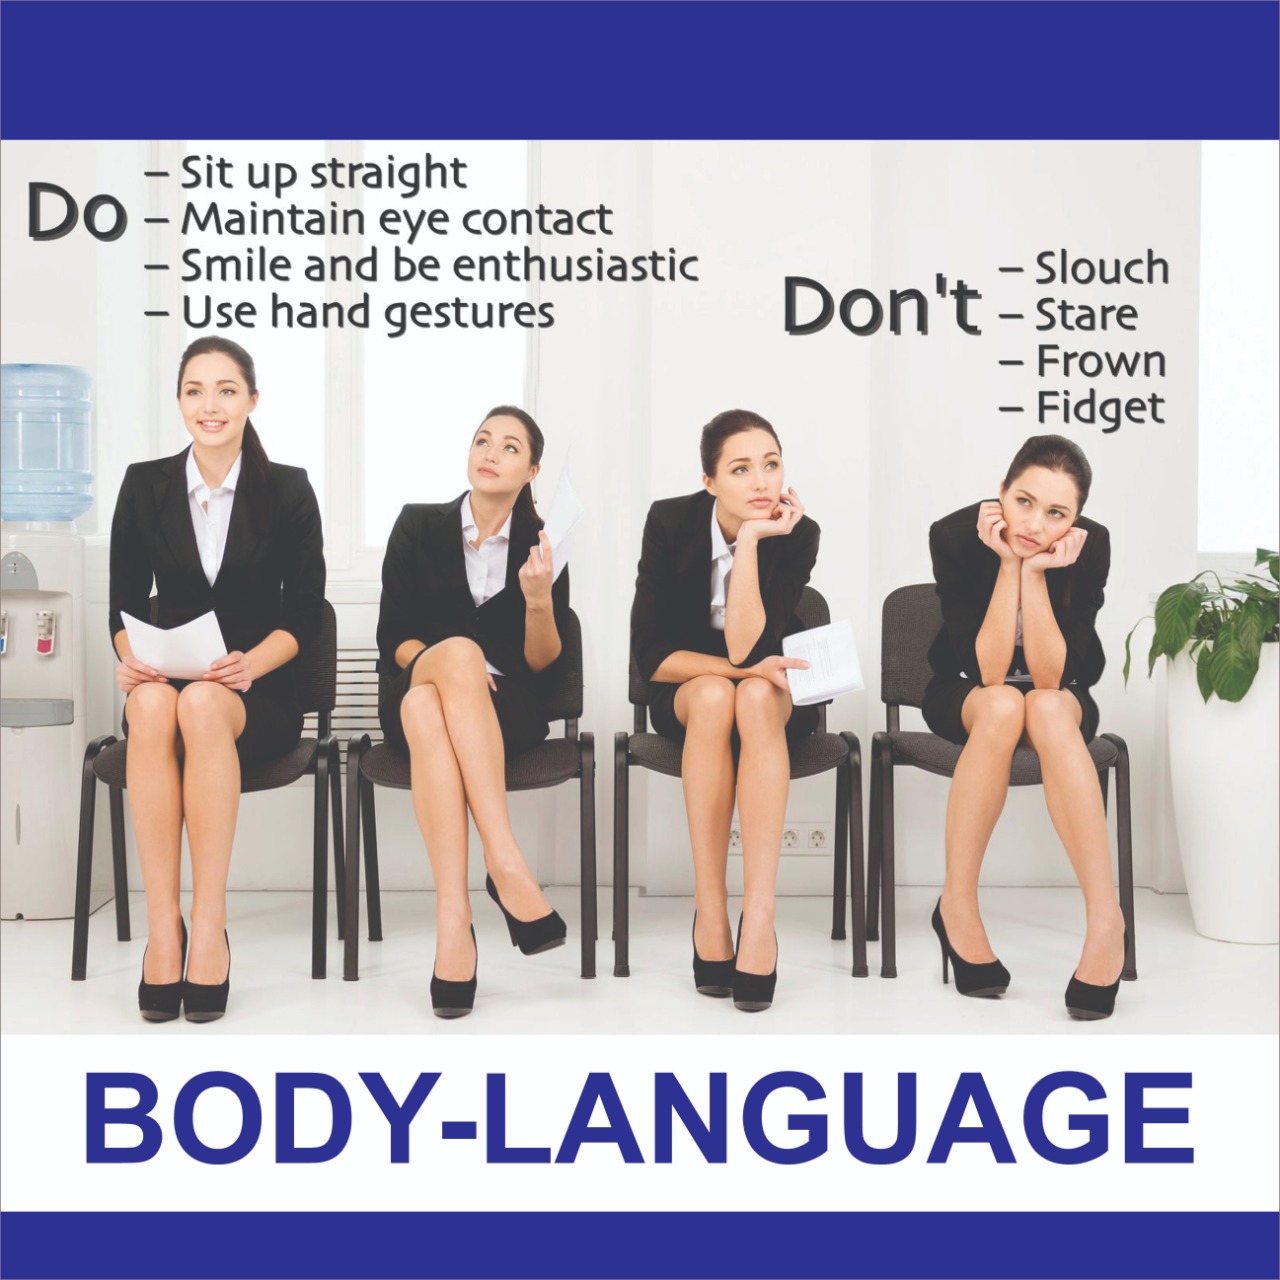 "Learn the art of communication beyond words at the Body Language Training Center by Modern English Coaching in Bhopal. Our expert trainers will help you master the nuances of non-verbal communication to help you excel in personal and professional settings. Enroll now & make a lasting impression.